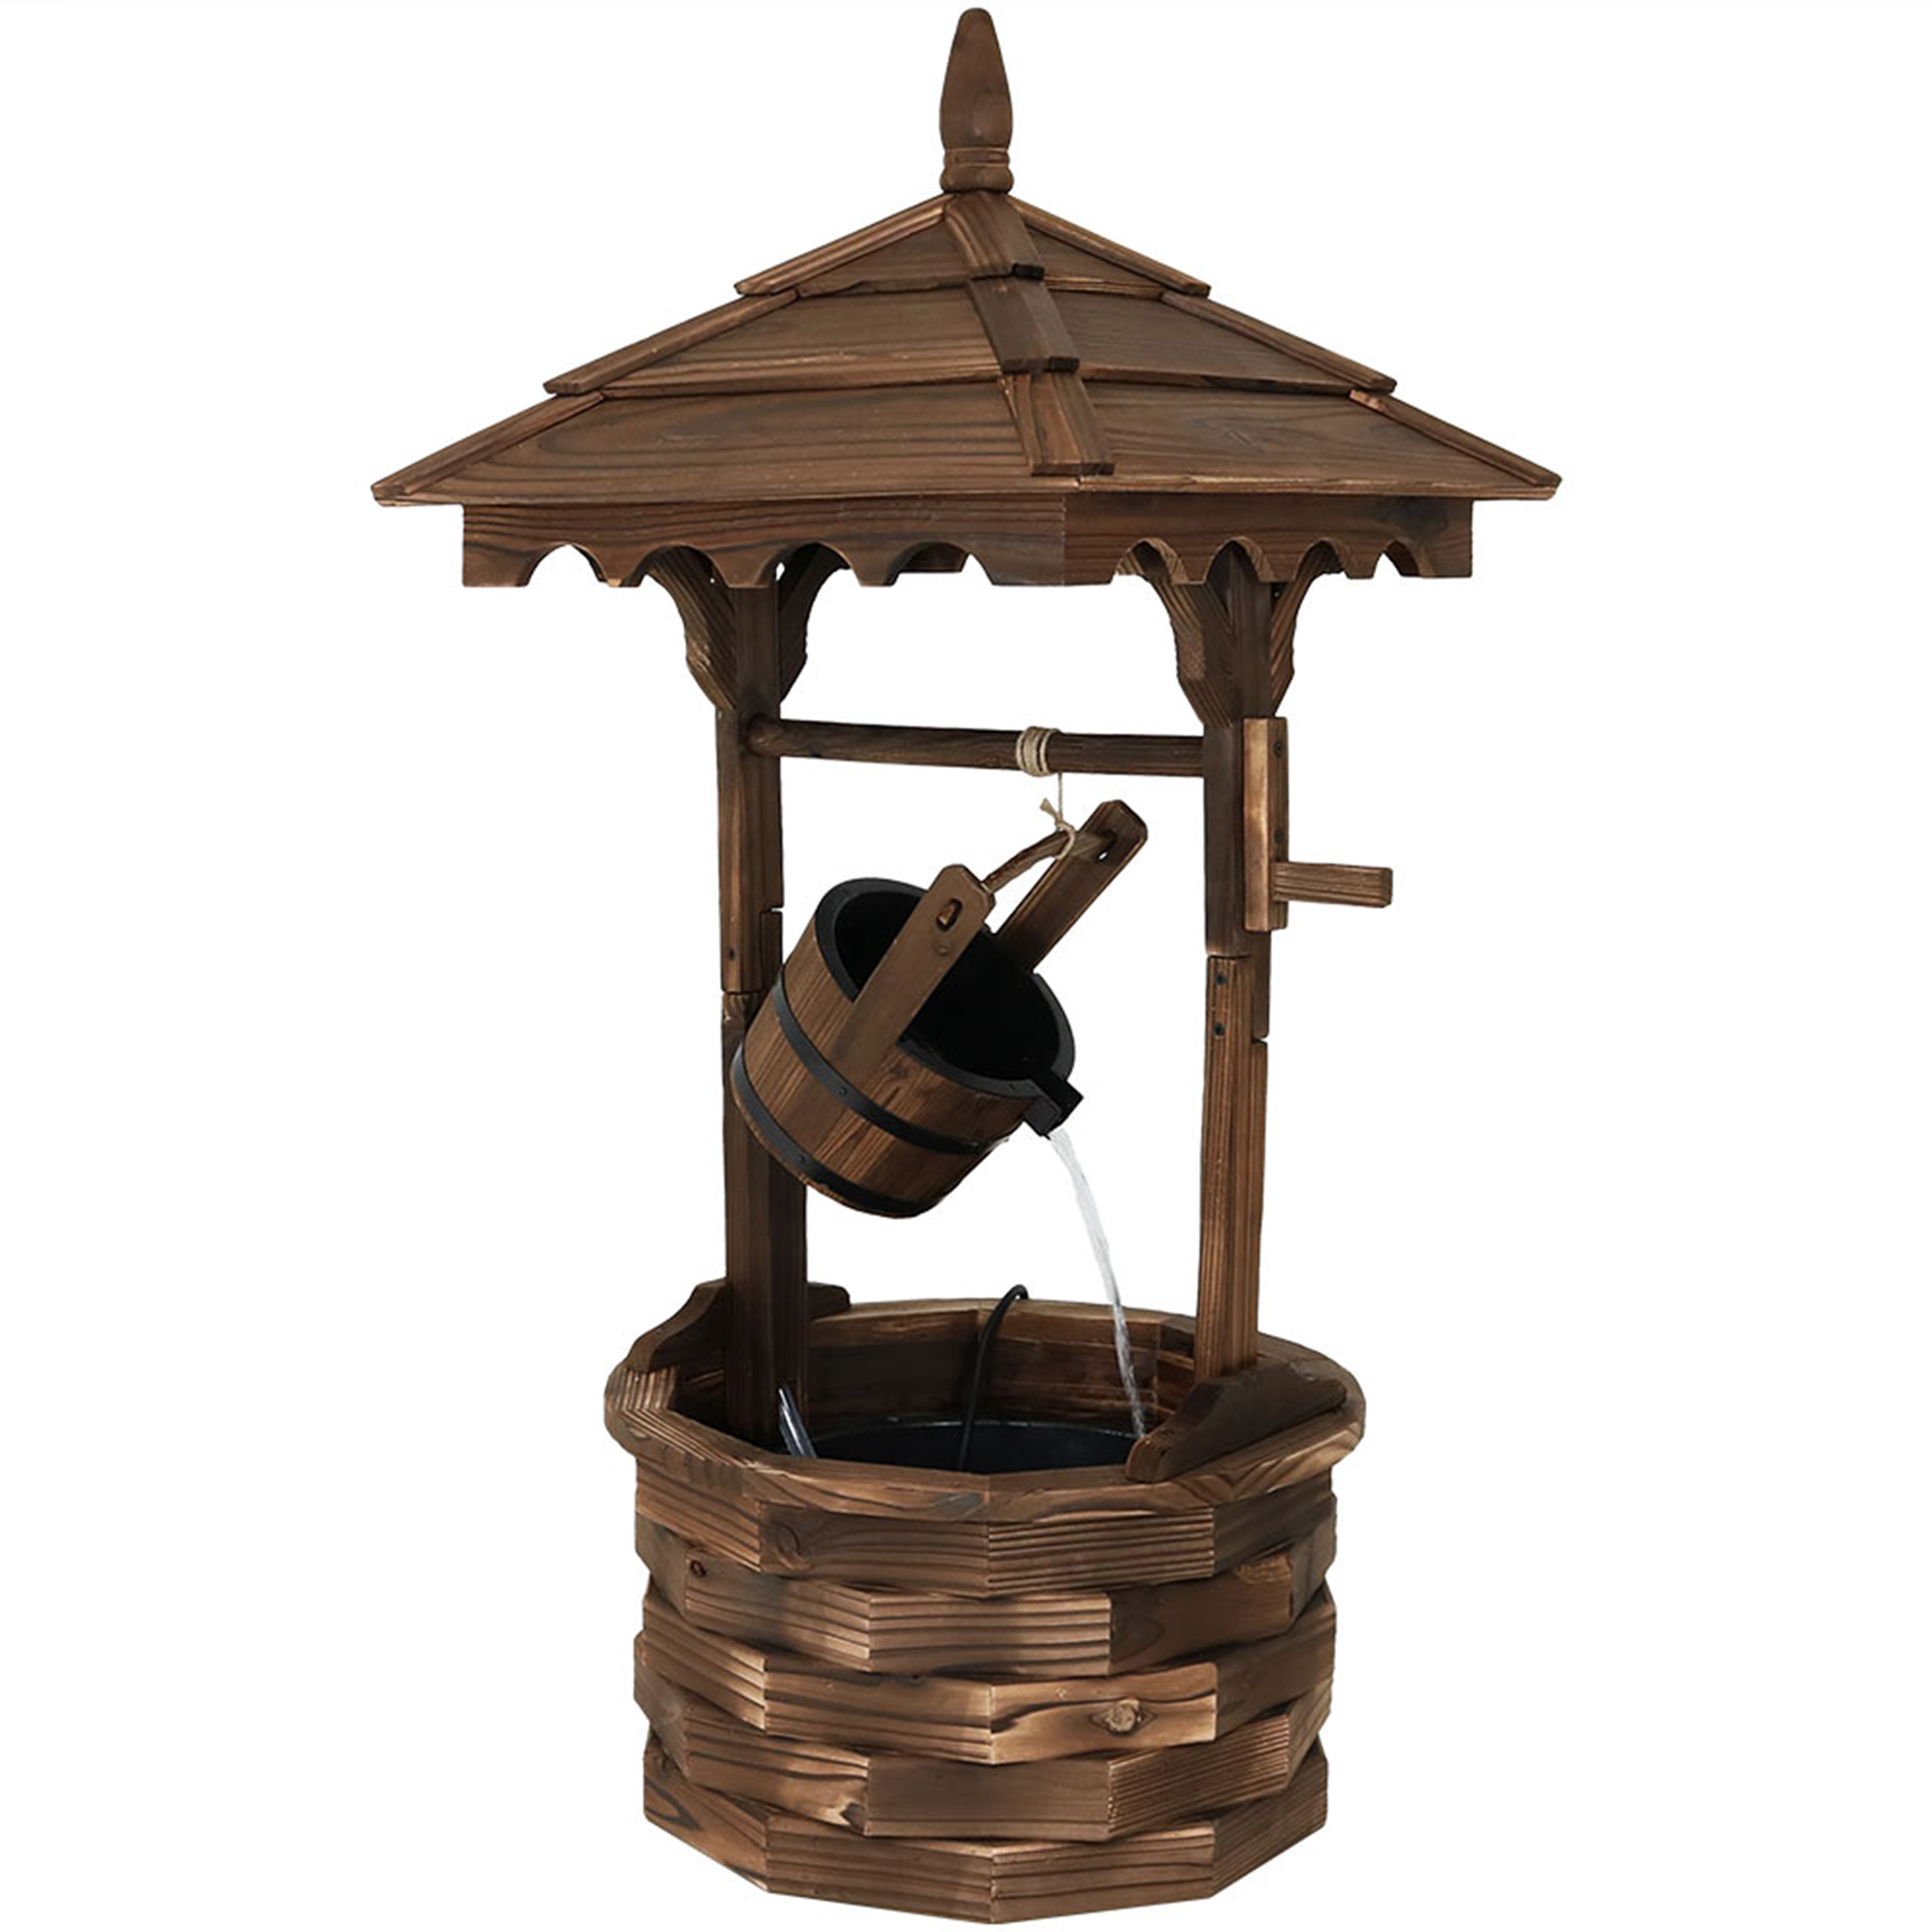 Sunnydaze Old-Fashioned Wood Wishing Well Water Fountain with Liner - 48-Inch